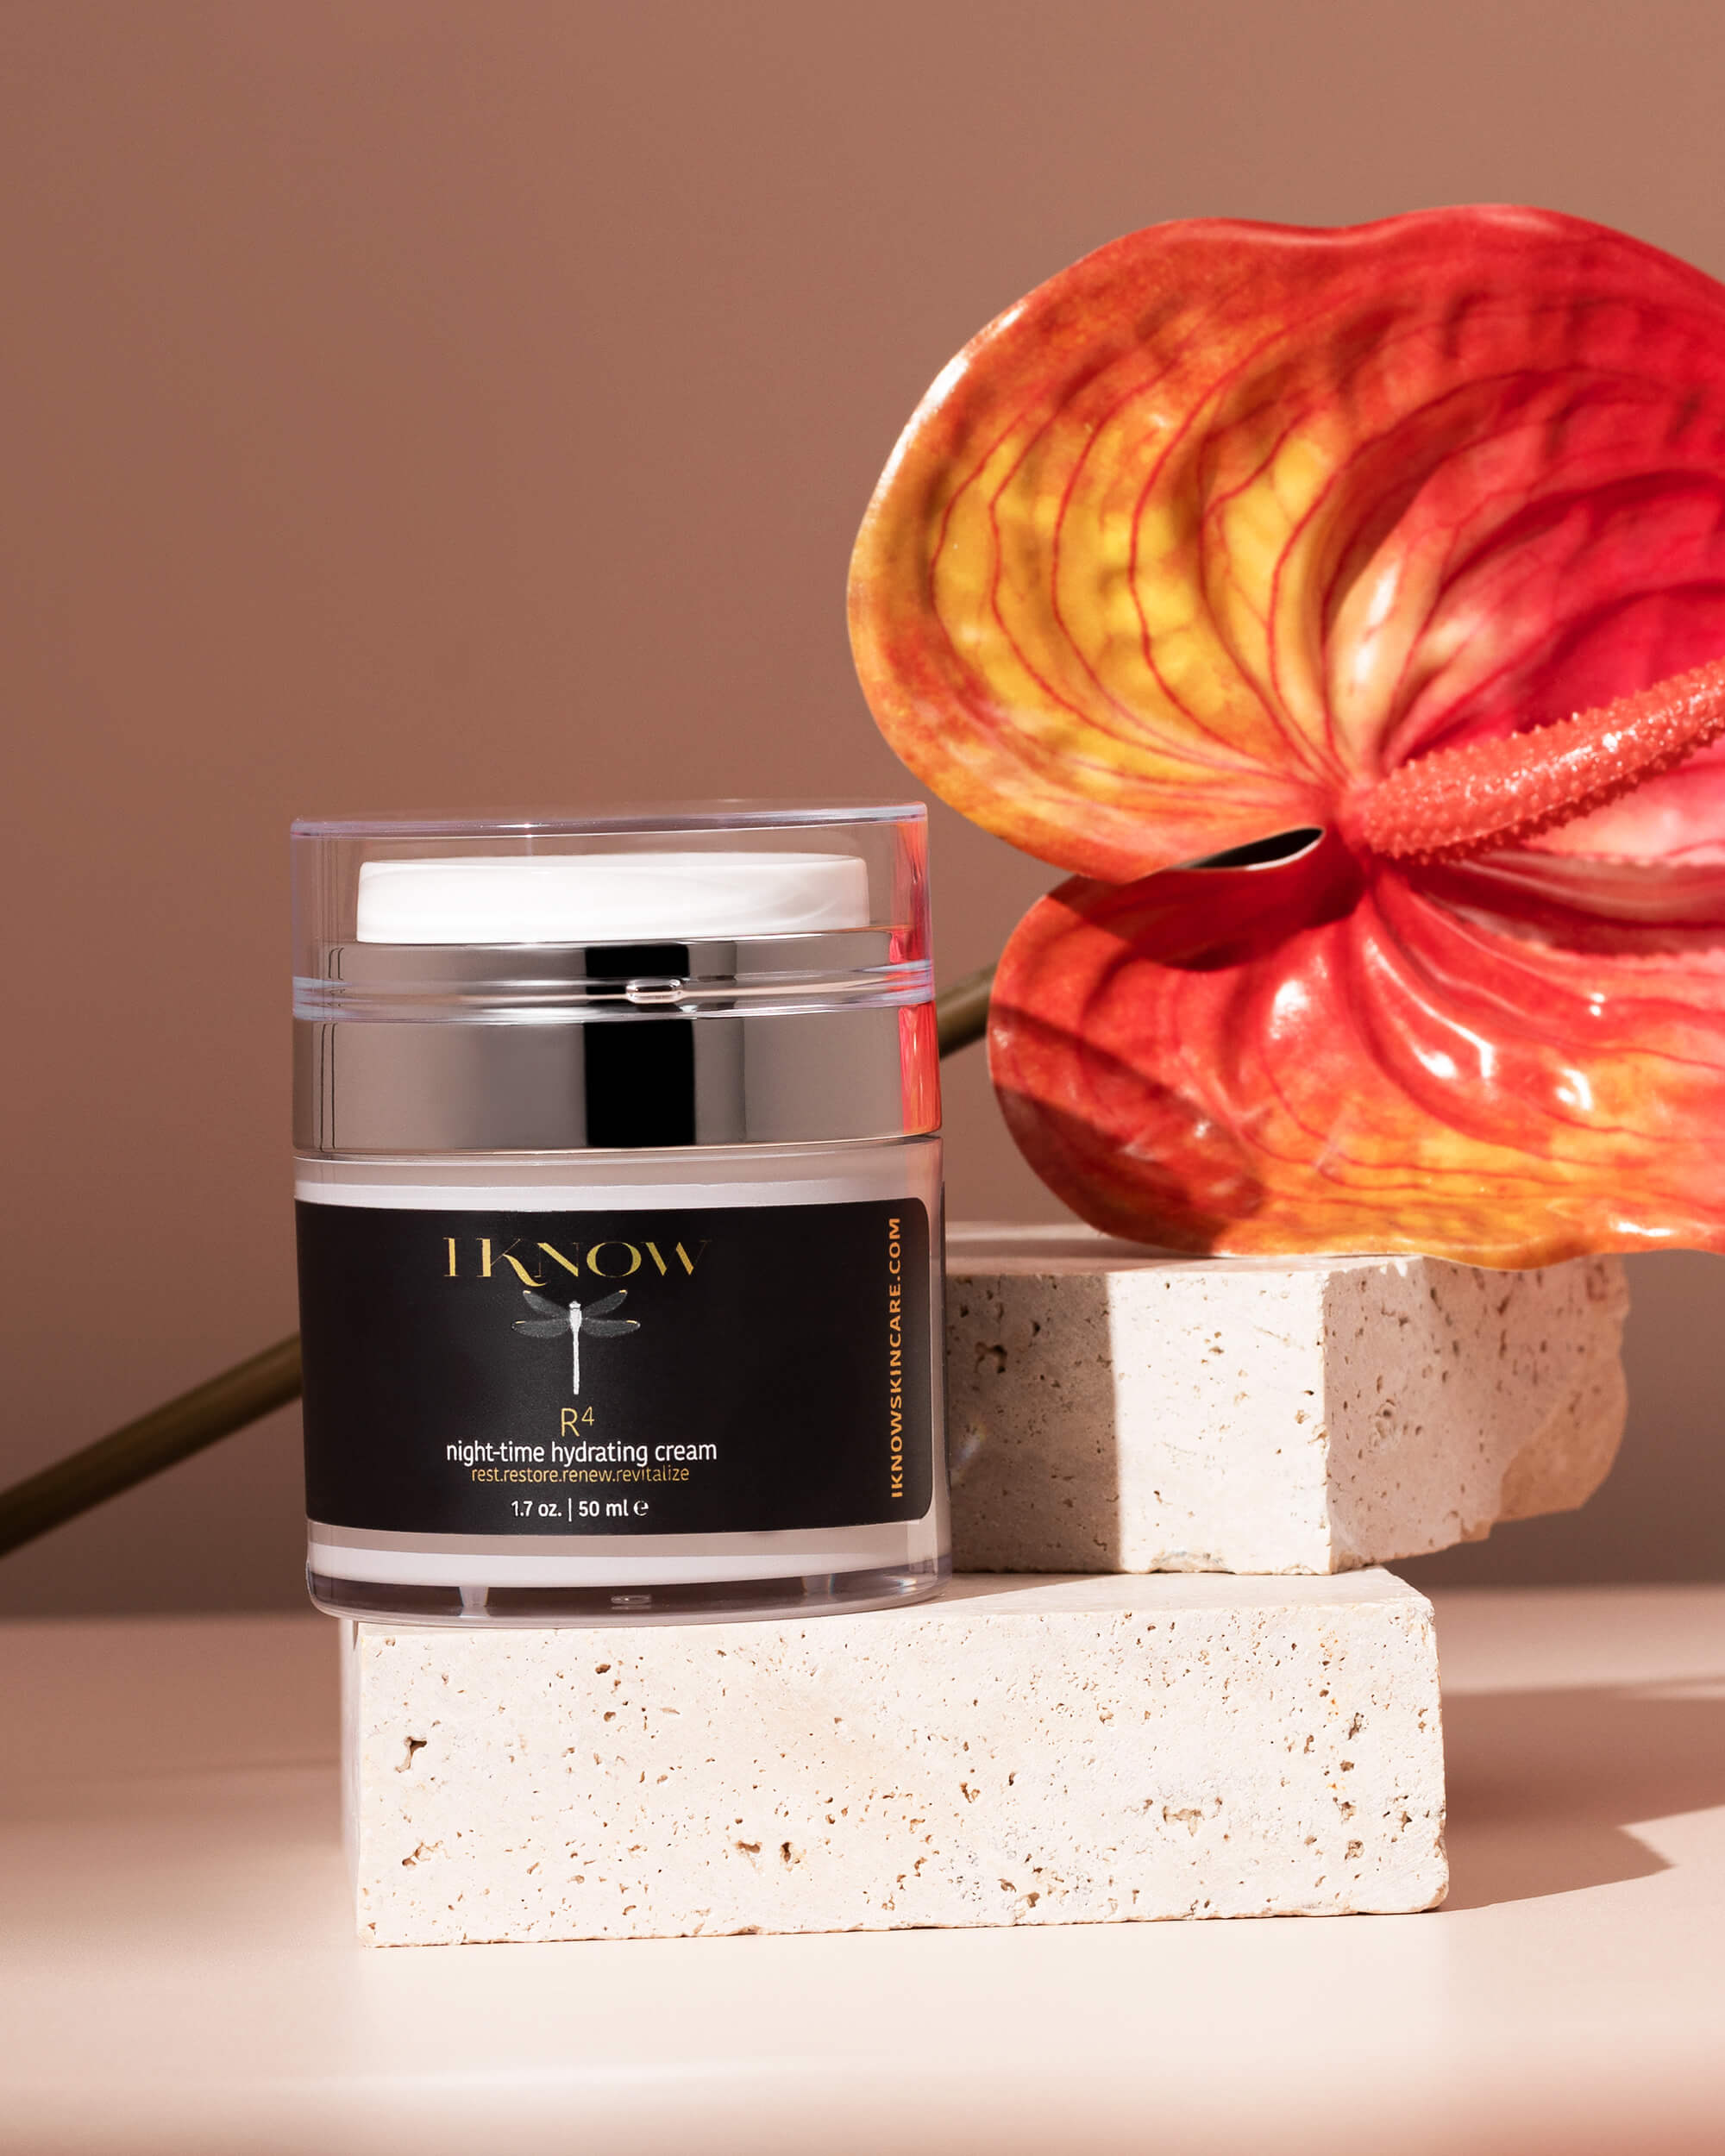 R4 Nighttime Hydrating Cream Nourishes Aging Skin and Restores Suppleness